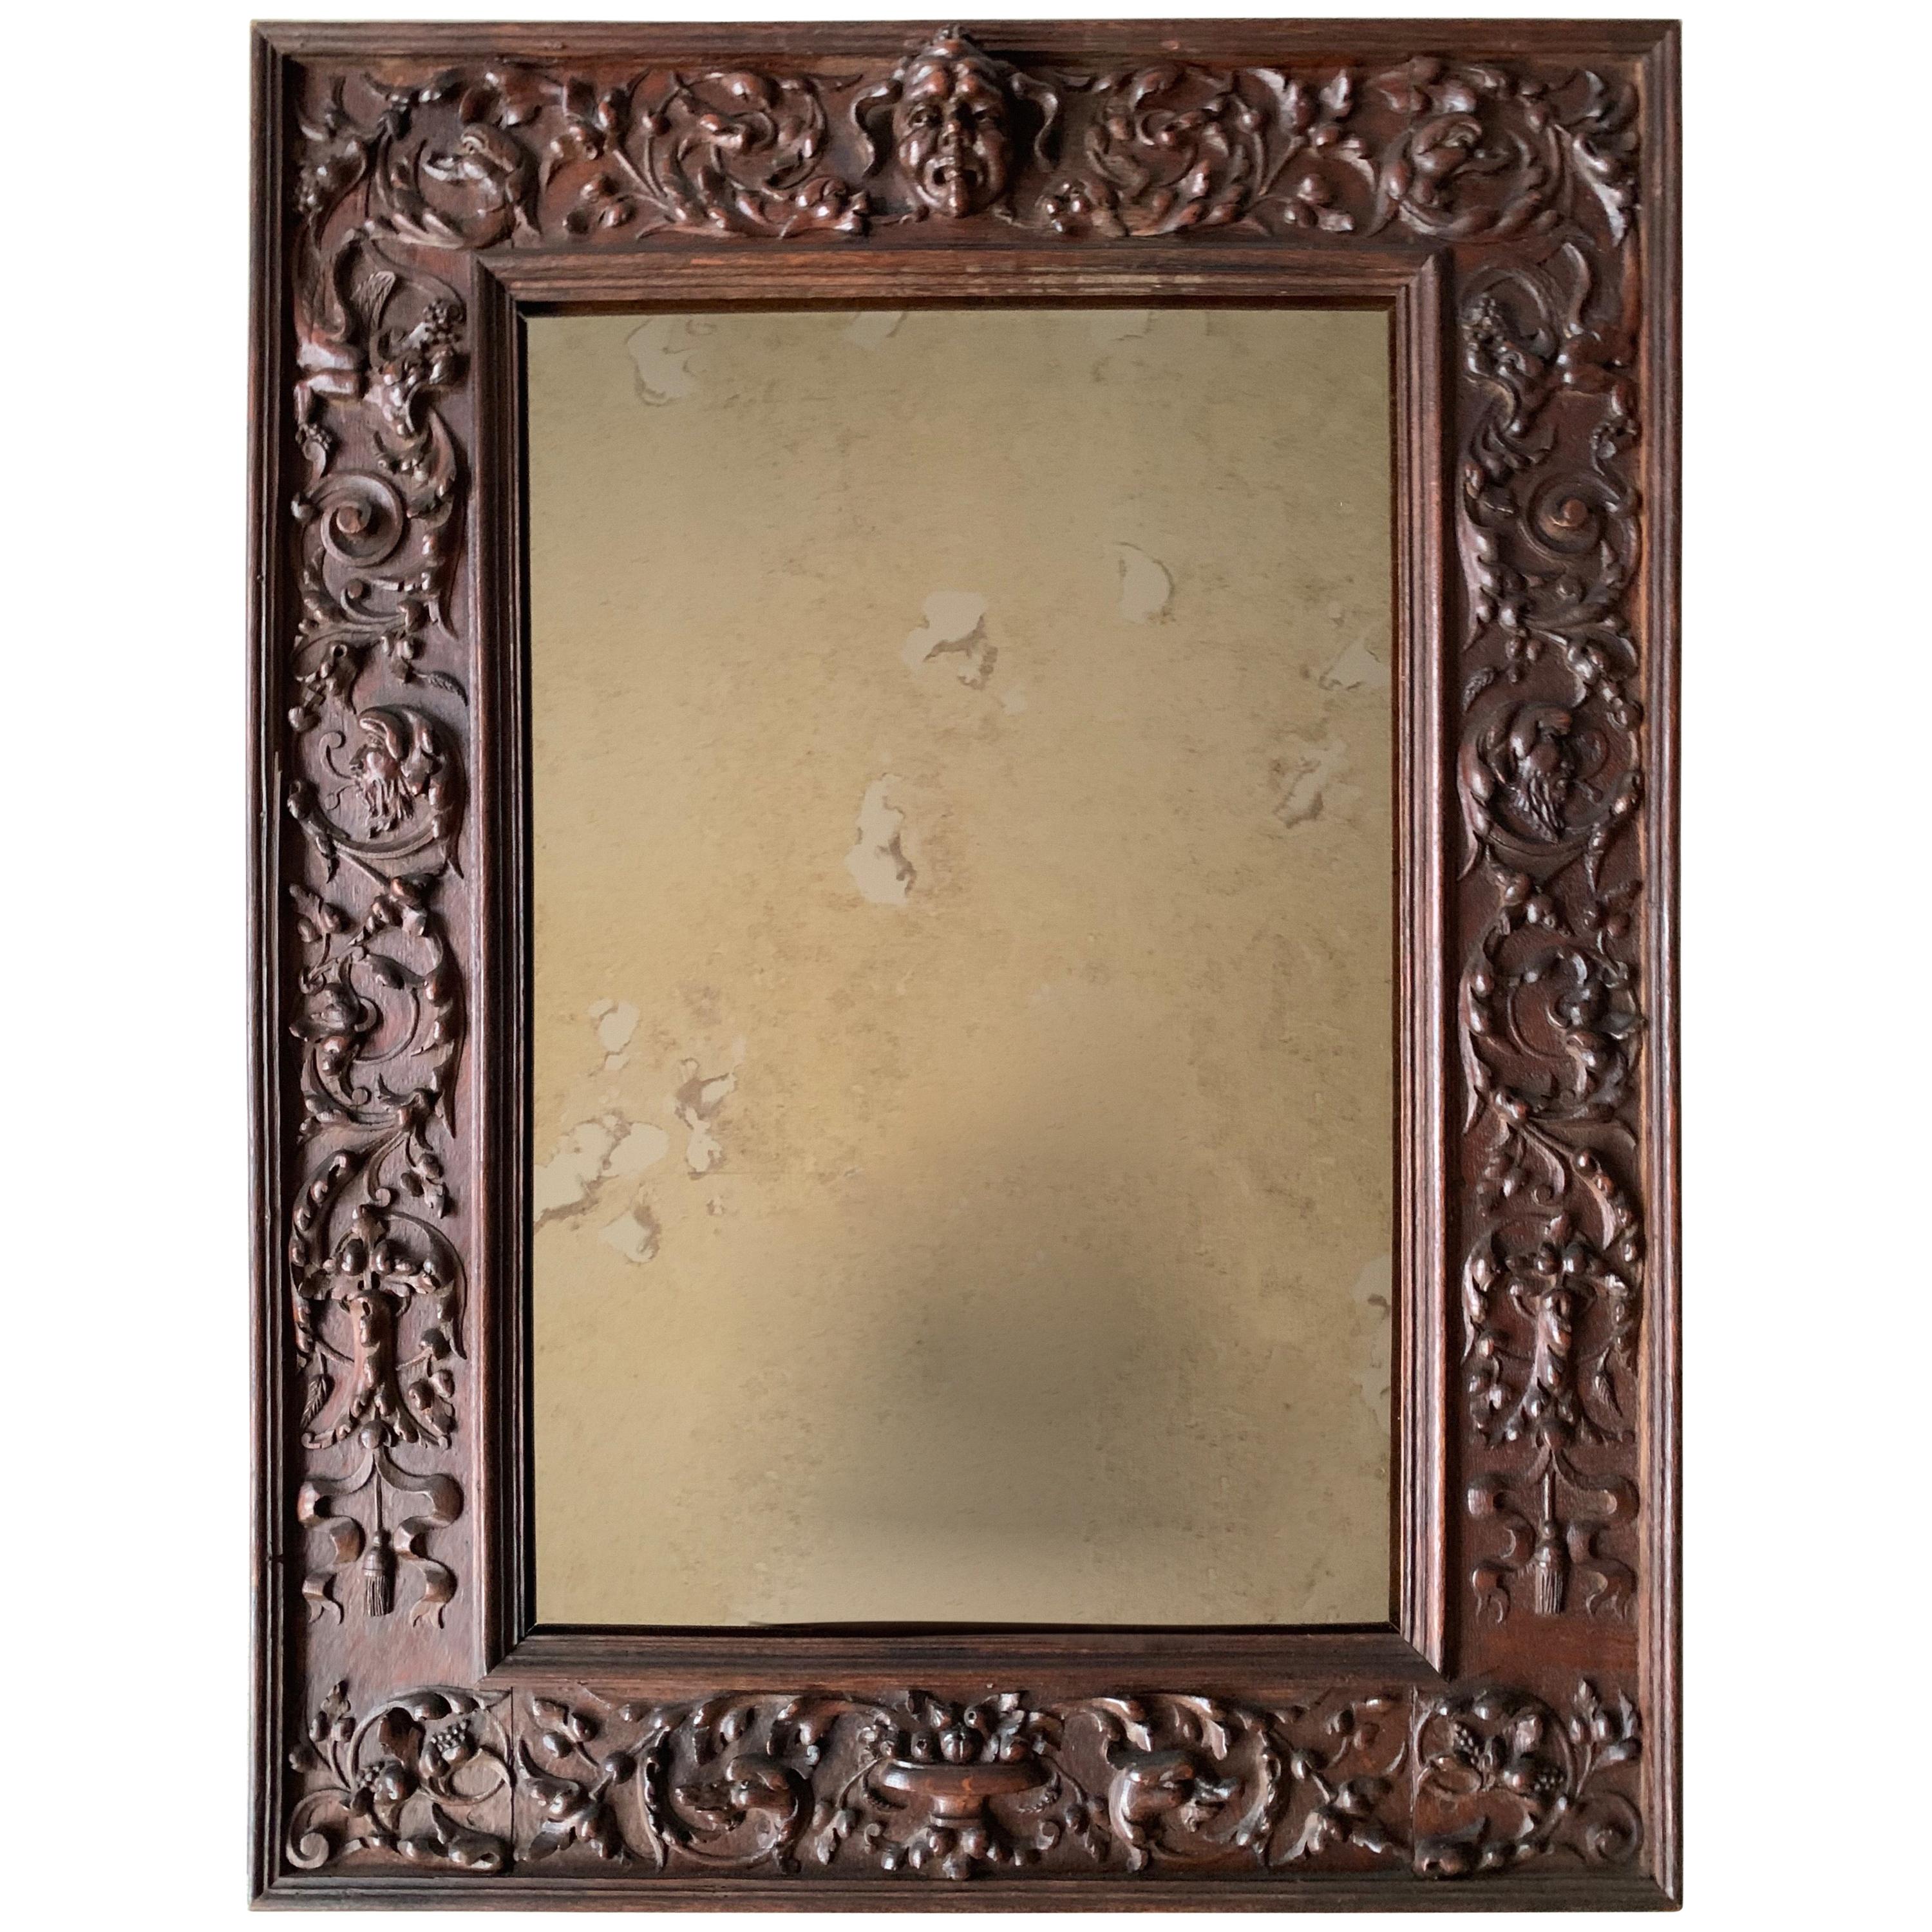 Top Quality Early Antique Renaissance Revival Wall Mirror Sculptured Frame Work For Sale